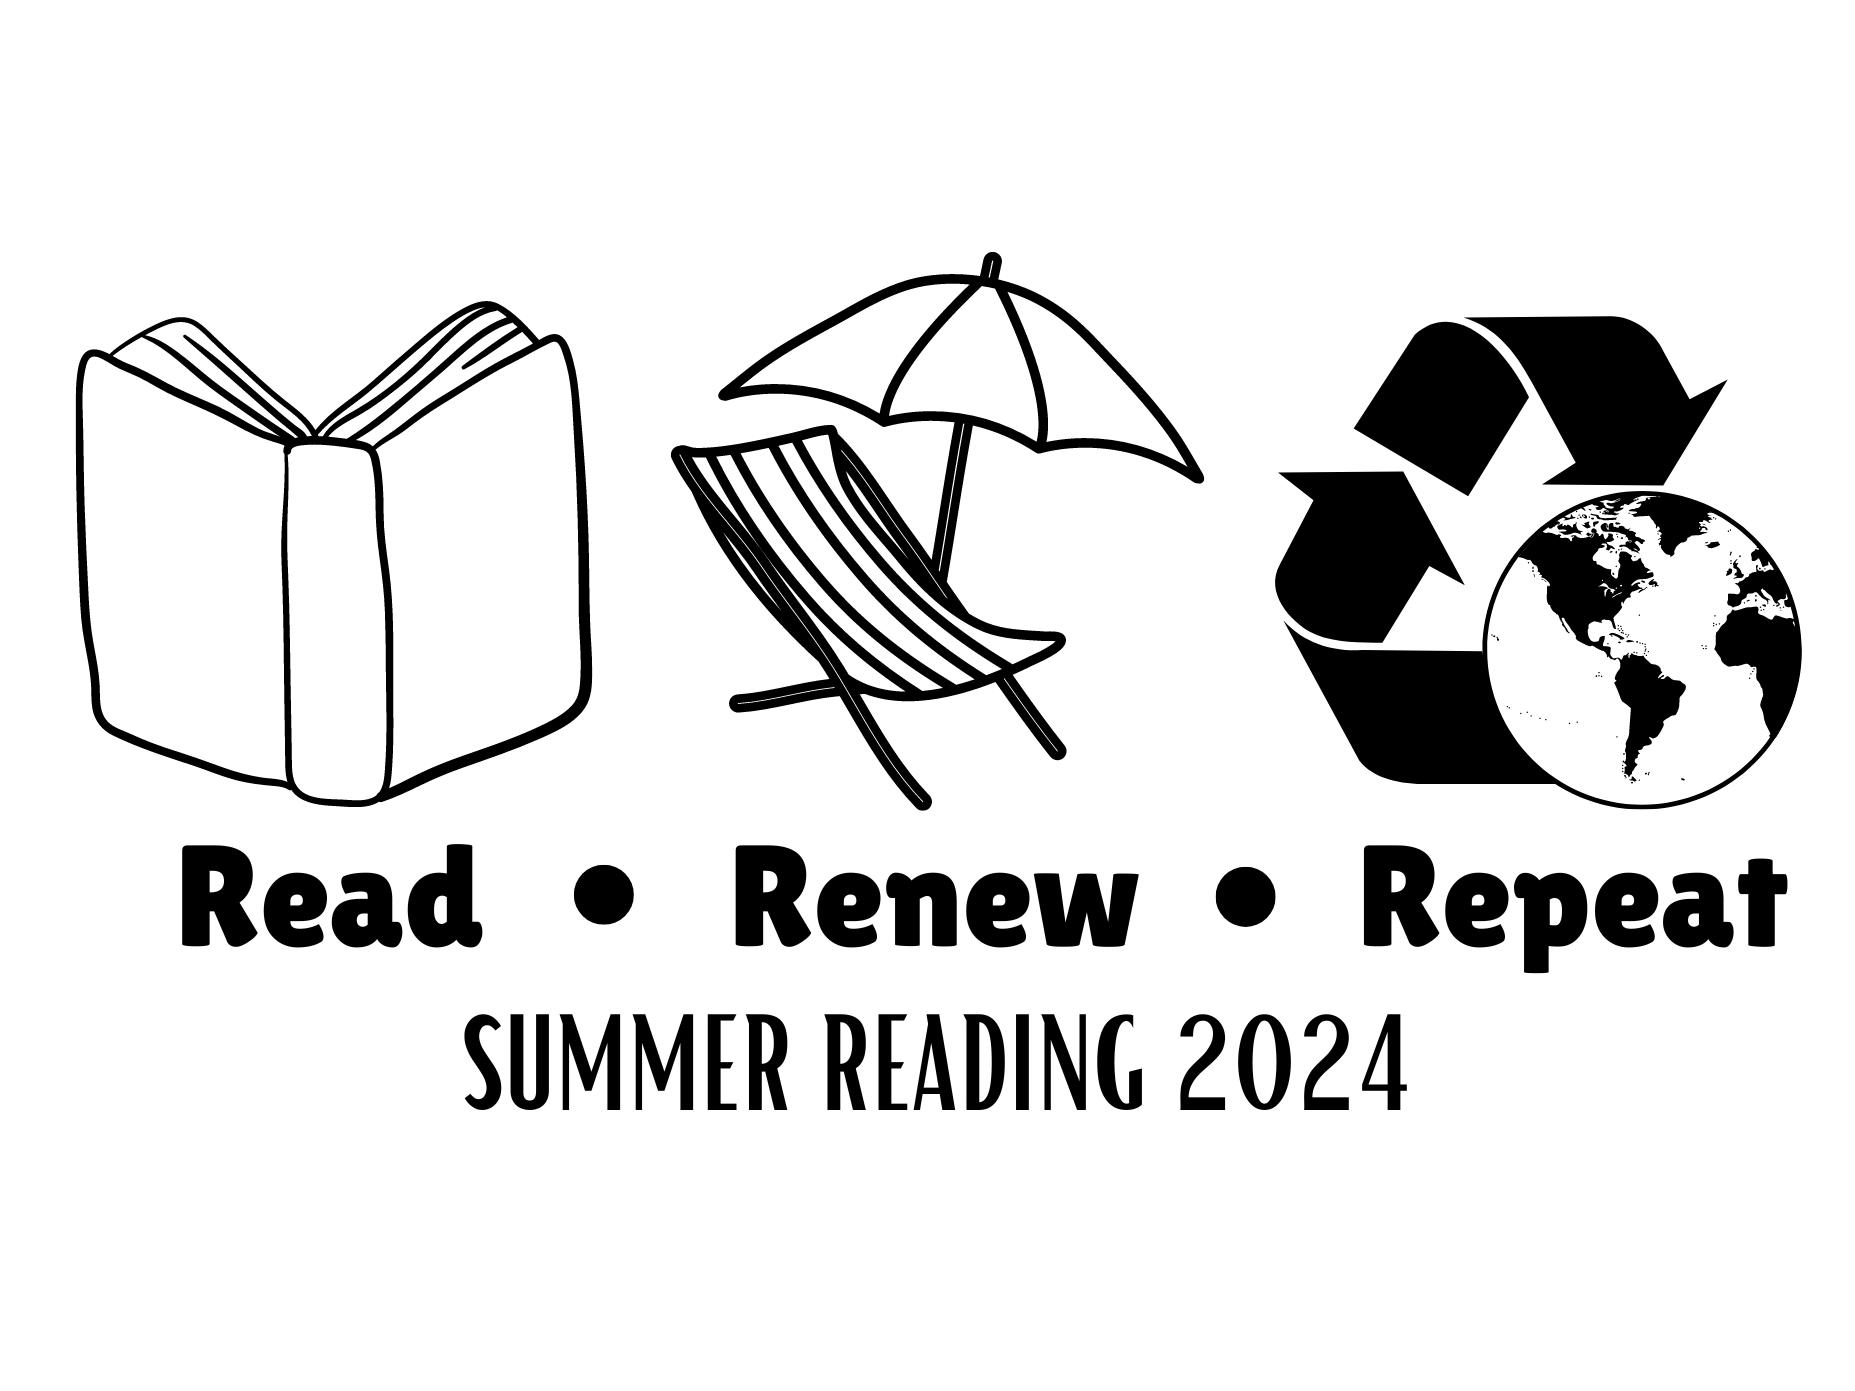 Picture of a book, beach chair, and earth with recycling symbol. Captioned "Read, Renew, Repeat, Summer Reading 2024".